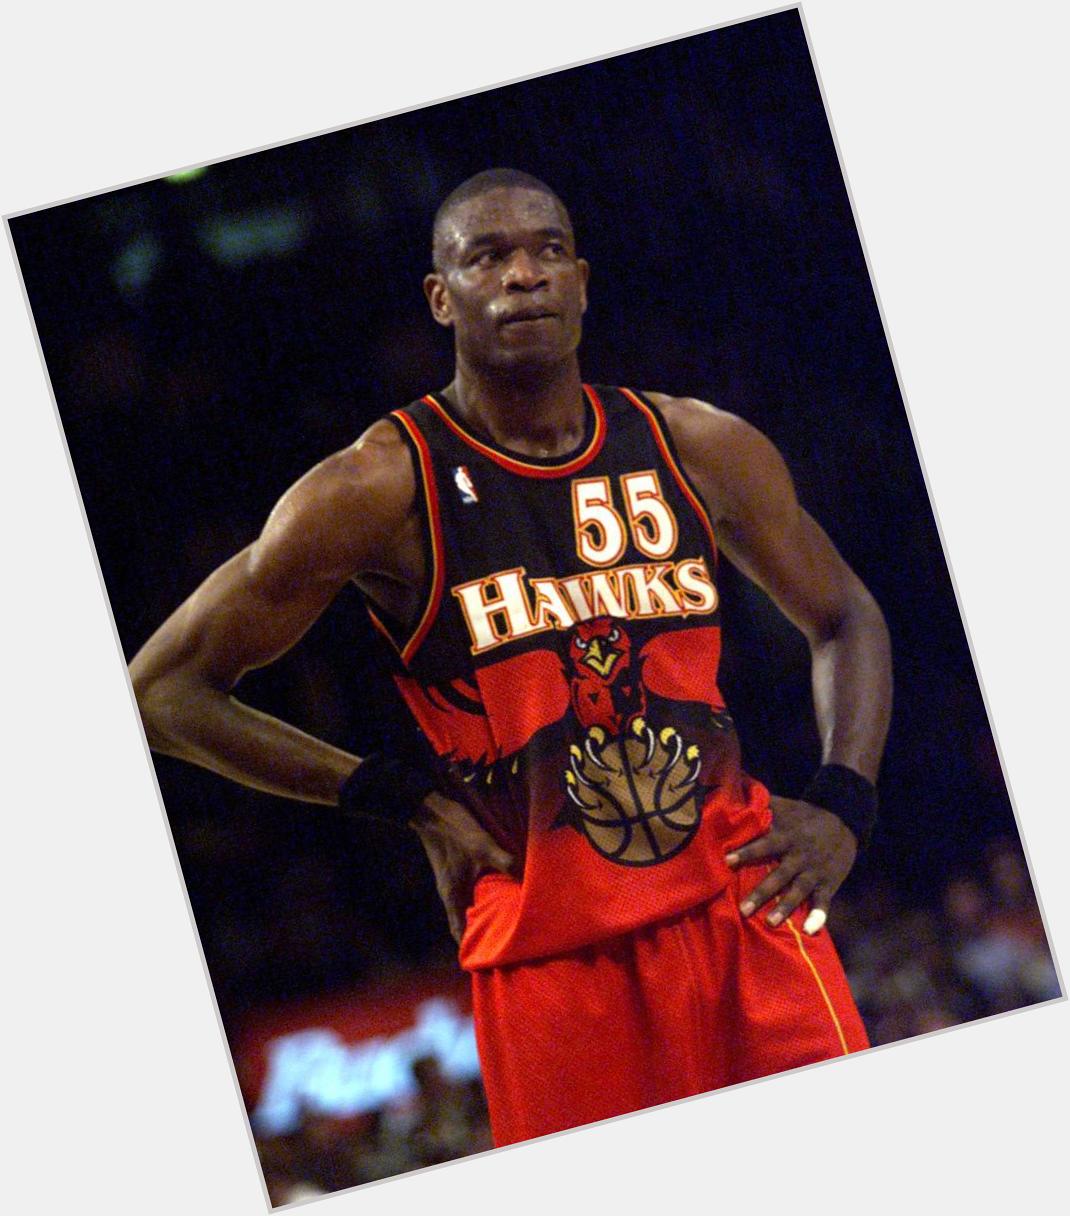 Happy birthday to Hall of Famer Dikembe Mutombo. The 8x All-Star and 4x Defensive Player of the Year turns 49 today. 